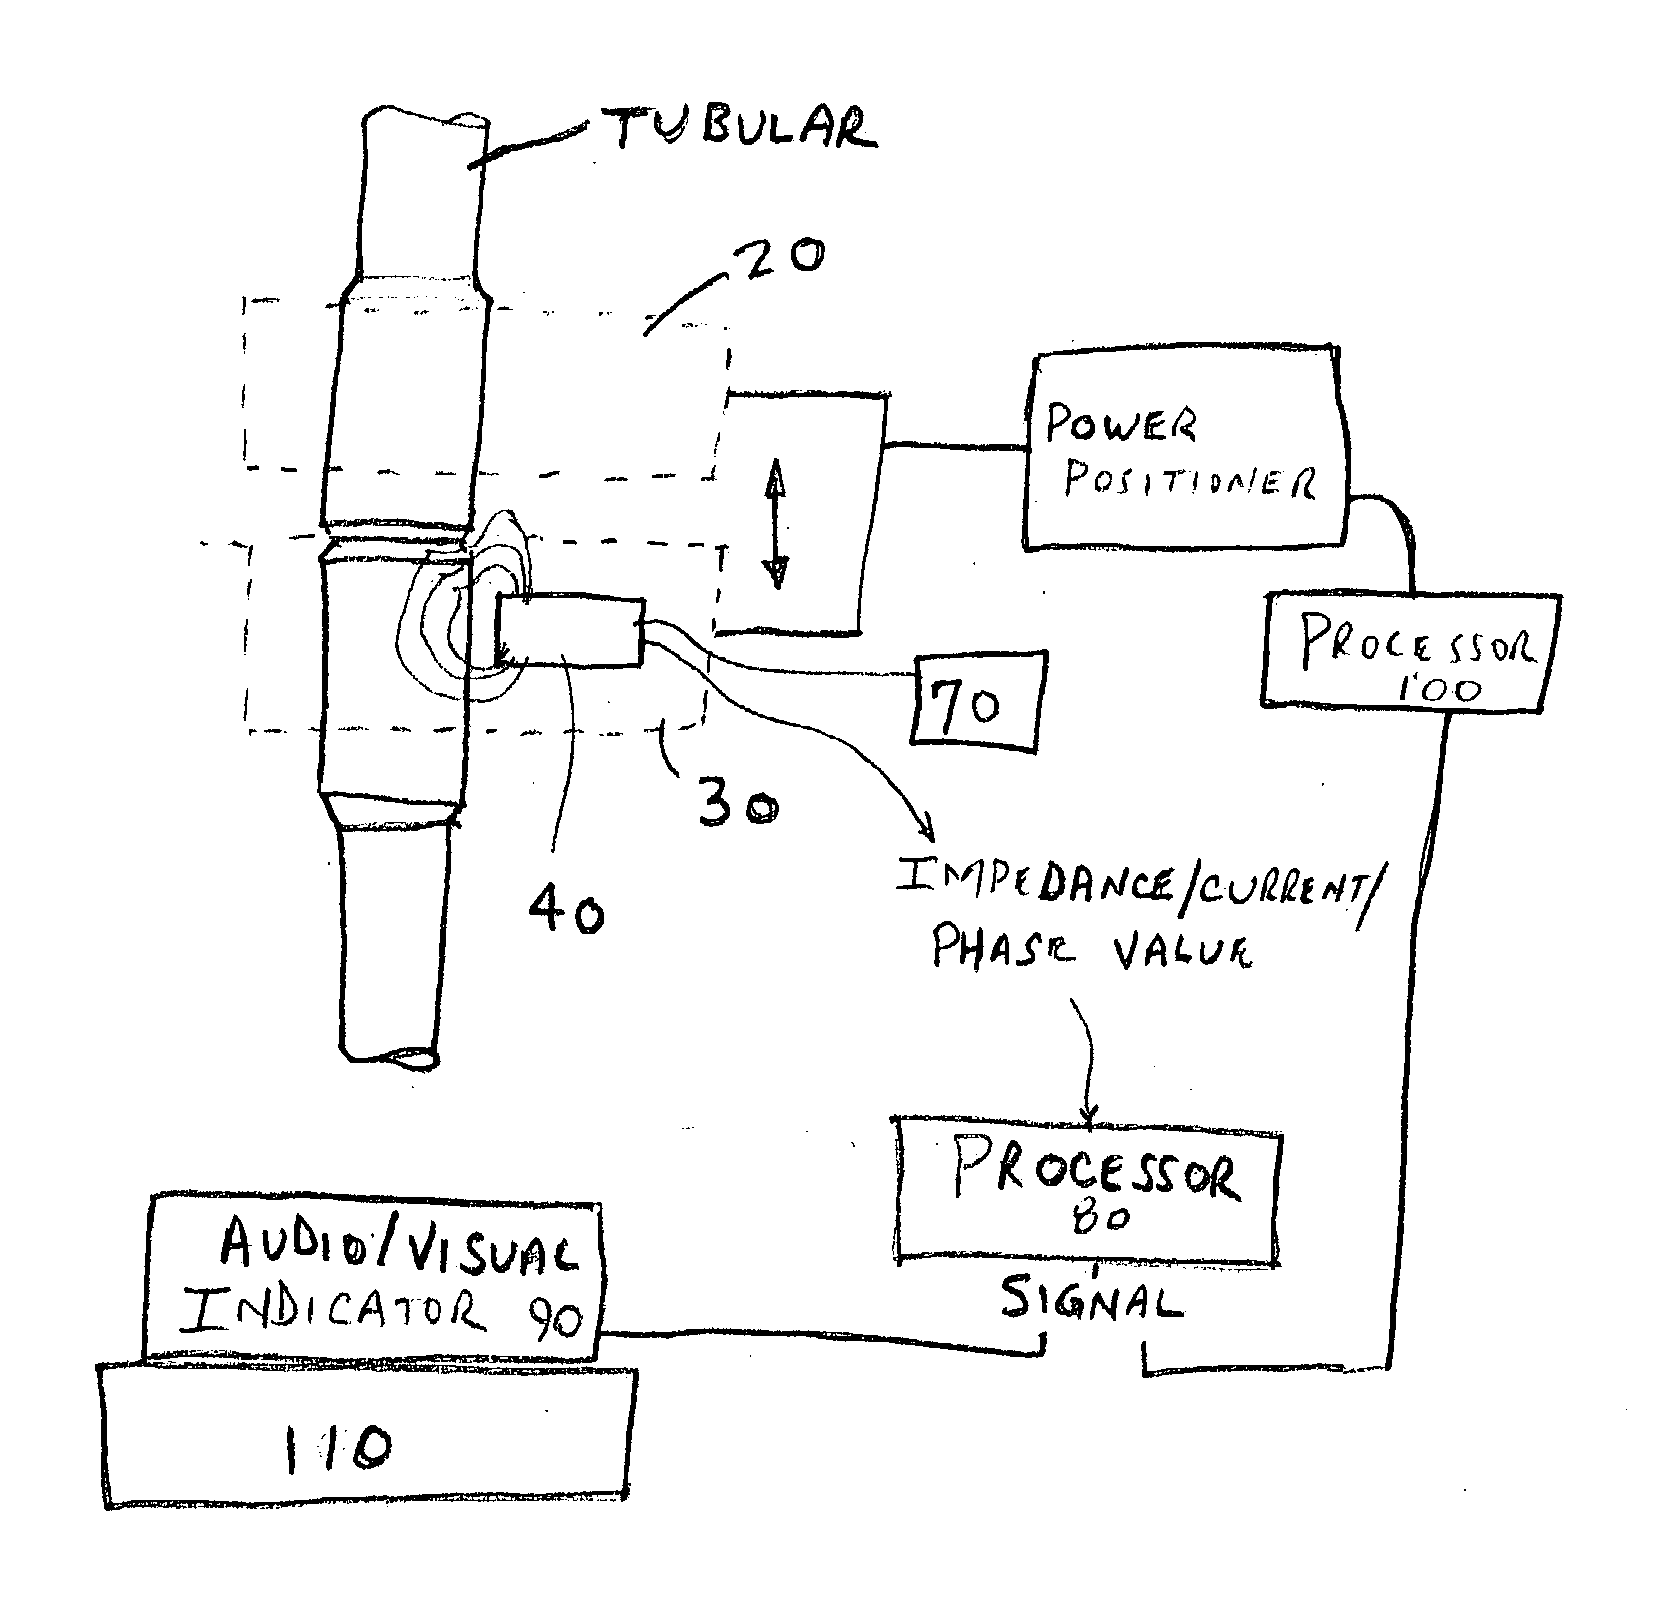 Apparatus and method for determining the position of the end of a threaded connection, and for positioning a power tong relative thereto